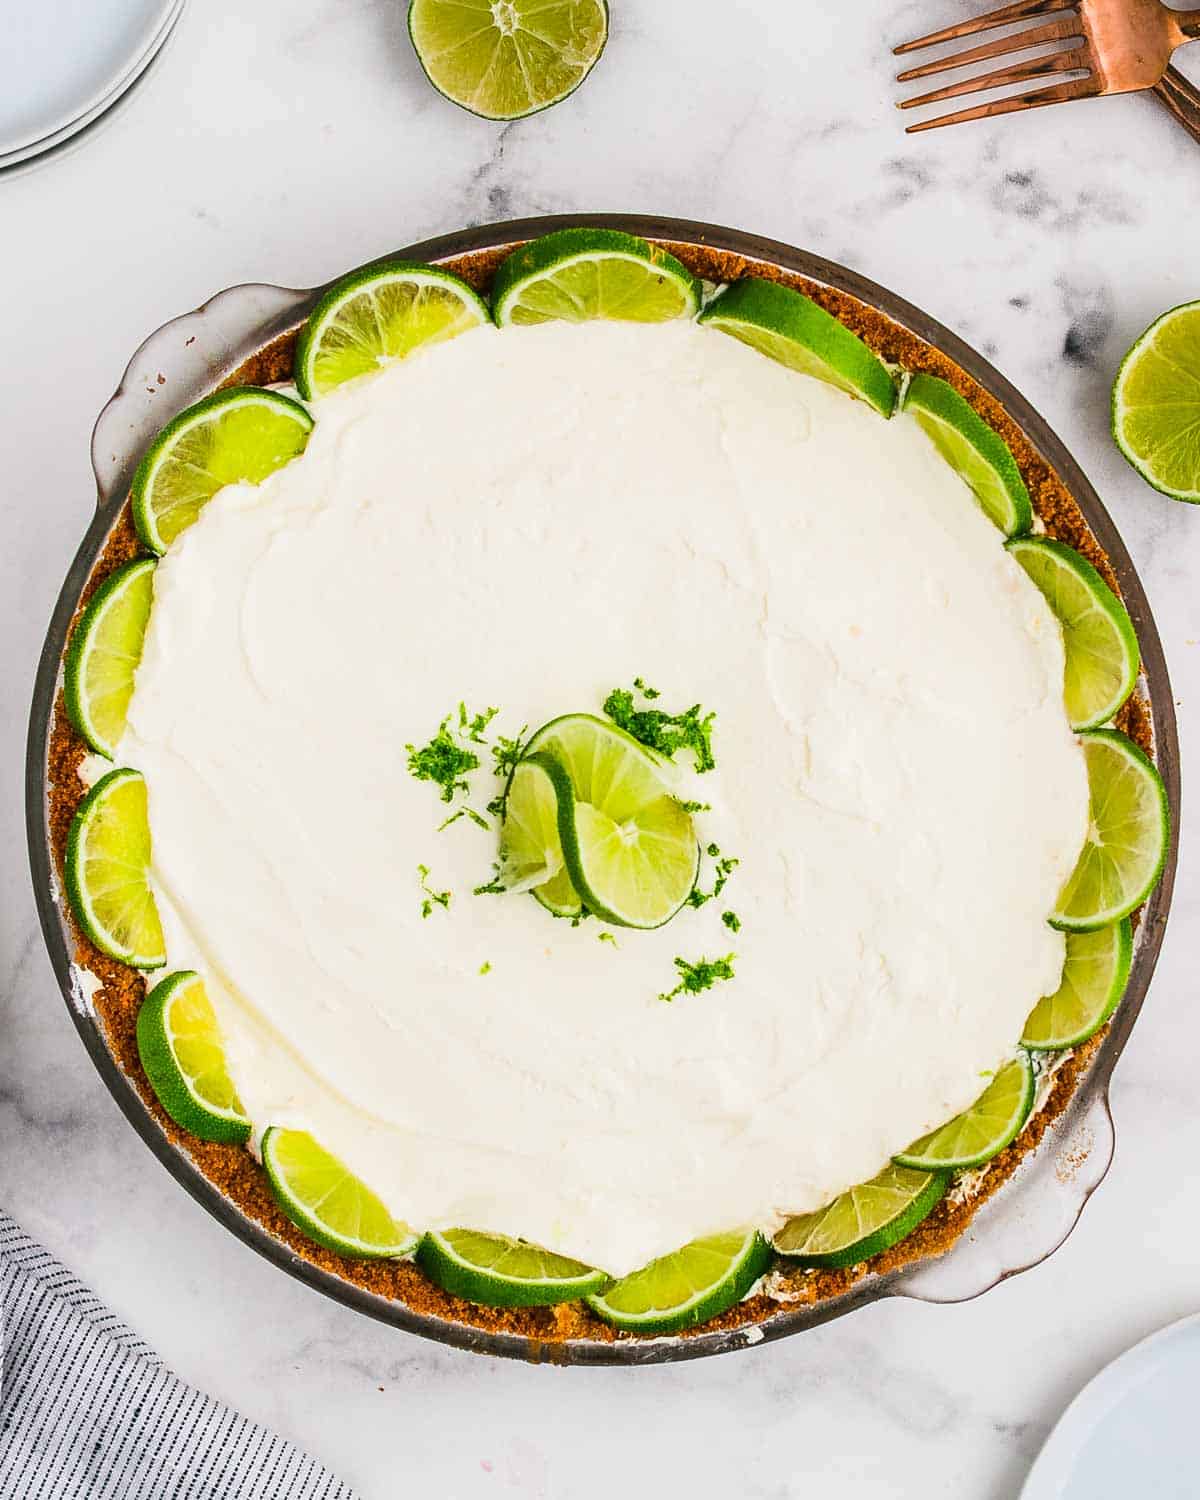 Top down view of a Key Lime Pie decorated with fresh limes.